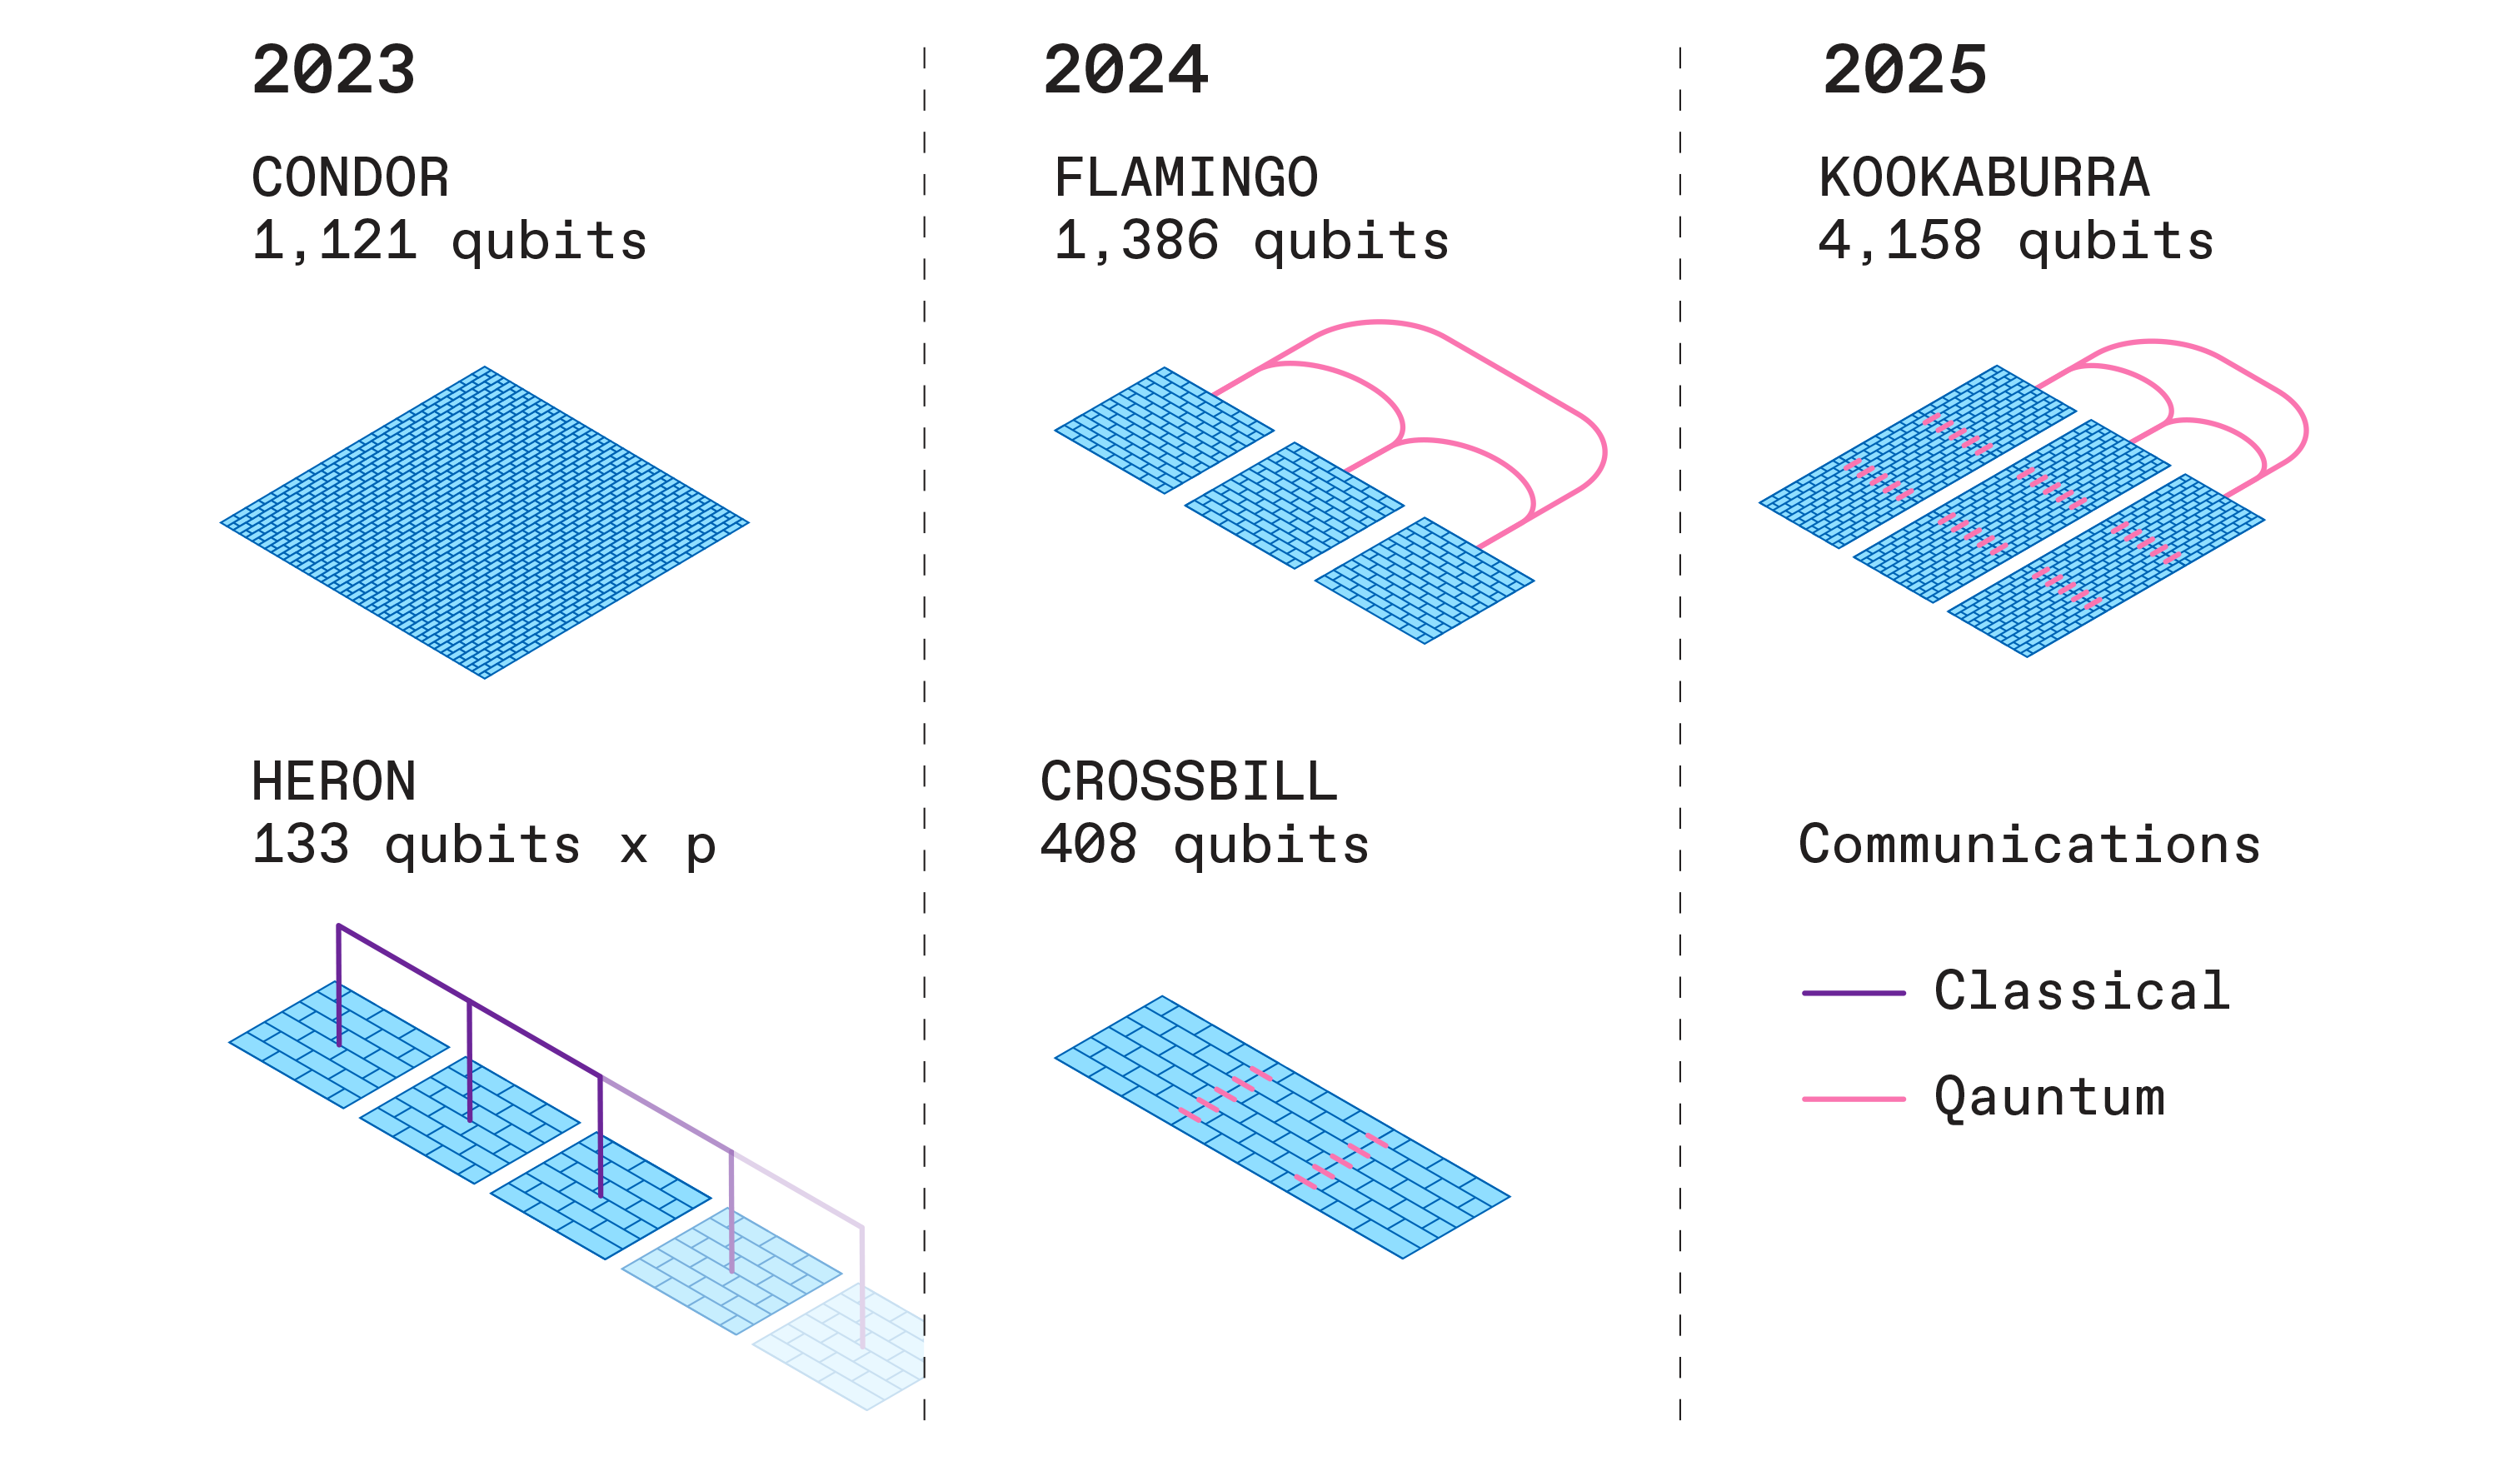 This diagram shows the quantum processors that IBM expects to have ready in 2023 (Condor and Heron), in 2024 (Flamingo and Crossbill), and in 2025 (Kookaburra).